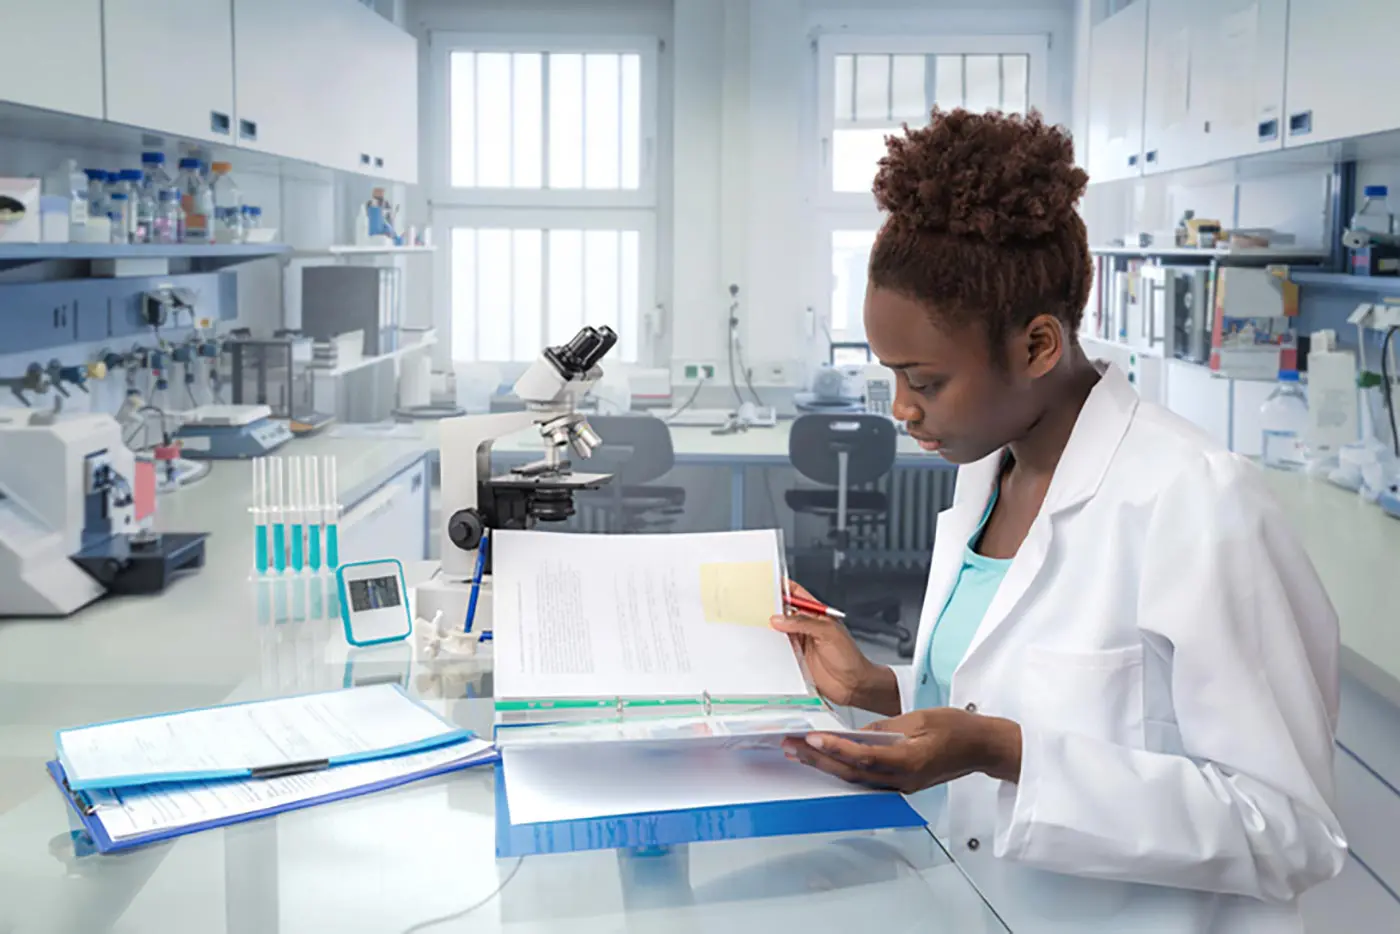 A female student conducts research in a lab setting